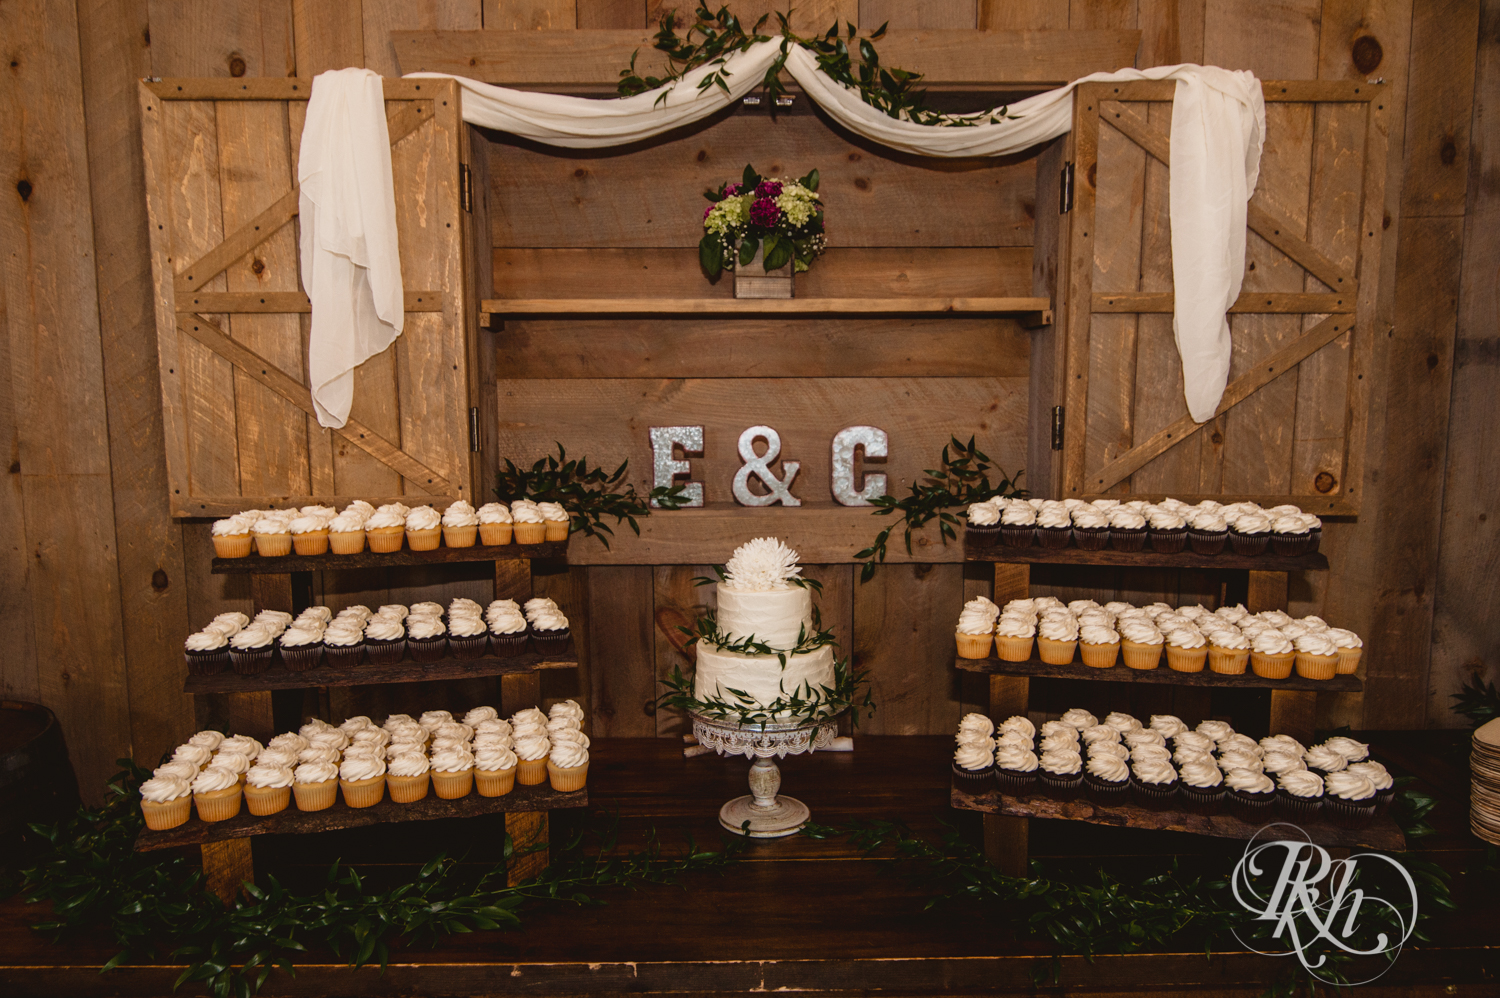 Wedding desert table with cupcakes at Creekside Farm Weddings and Events in Rush City, Minnesota.